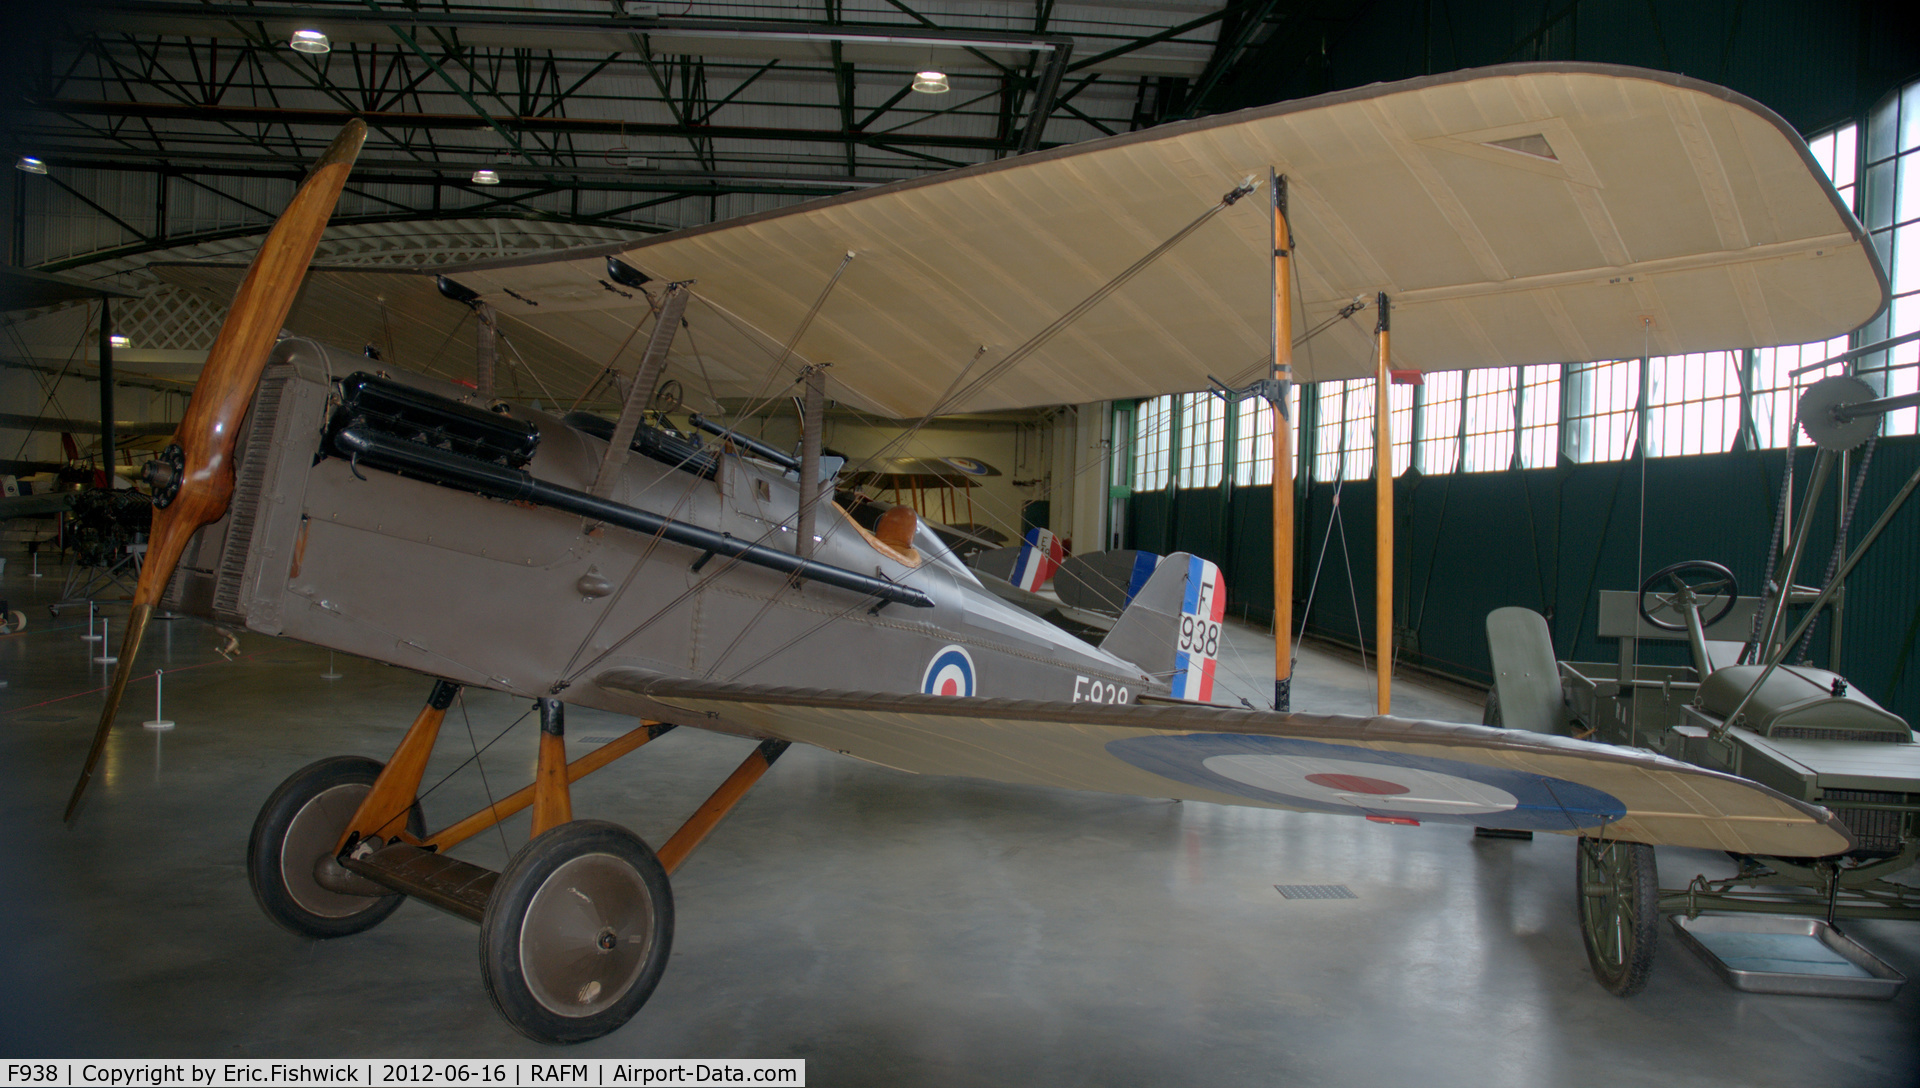 F938, Royal Aircraft Factory SE-5A C/N 687/2404, 3. F938  now in the new Grahame-White Factory Building at RAF Museum, Hendon.